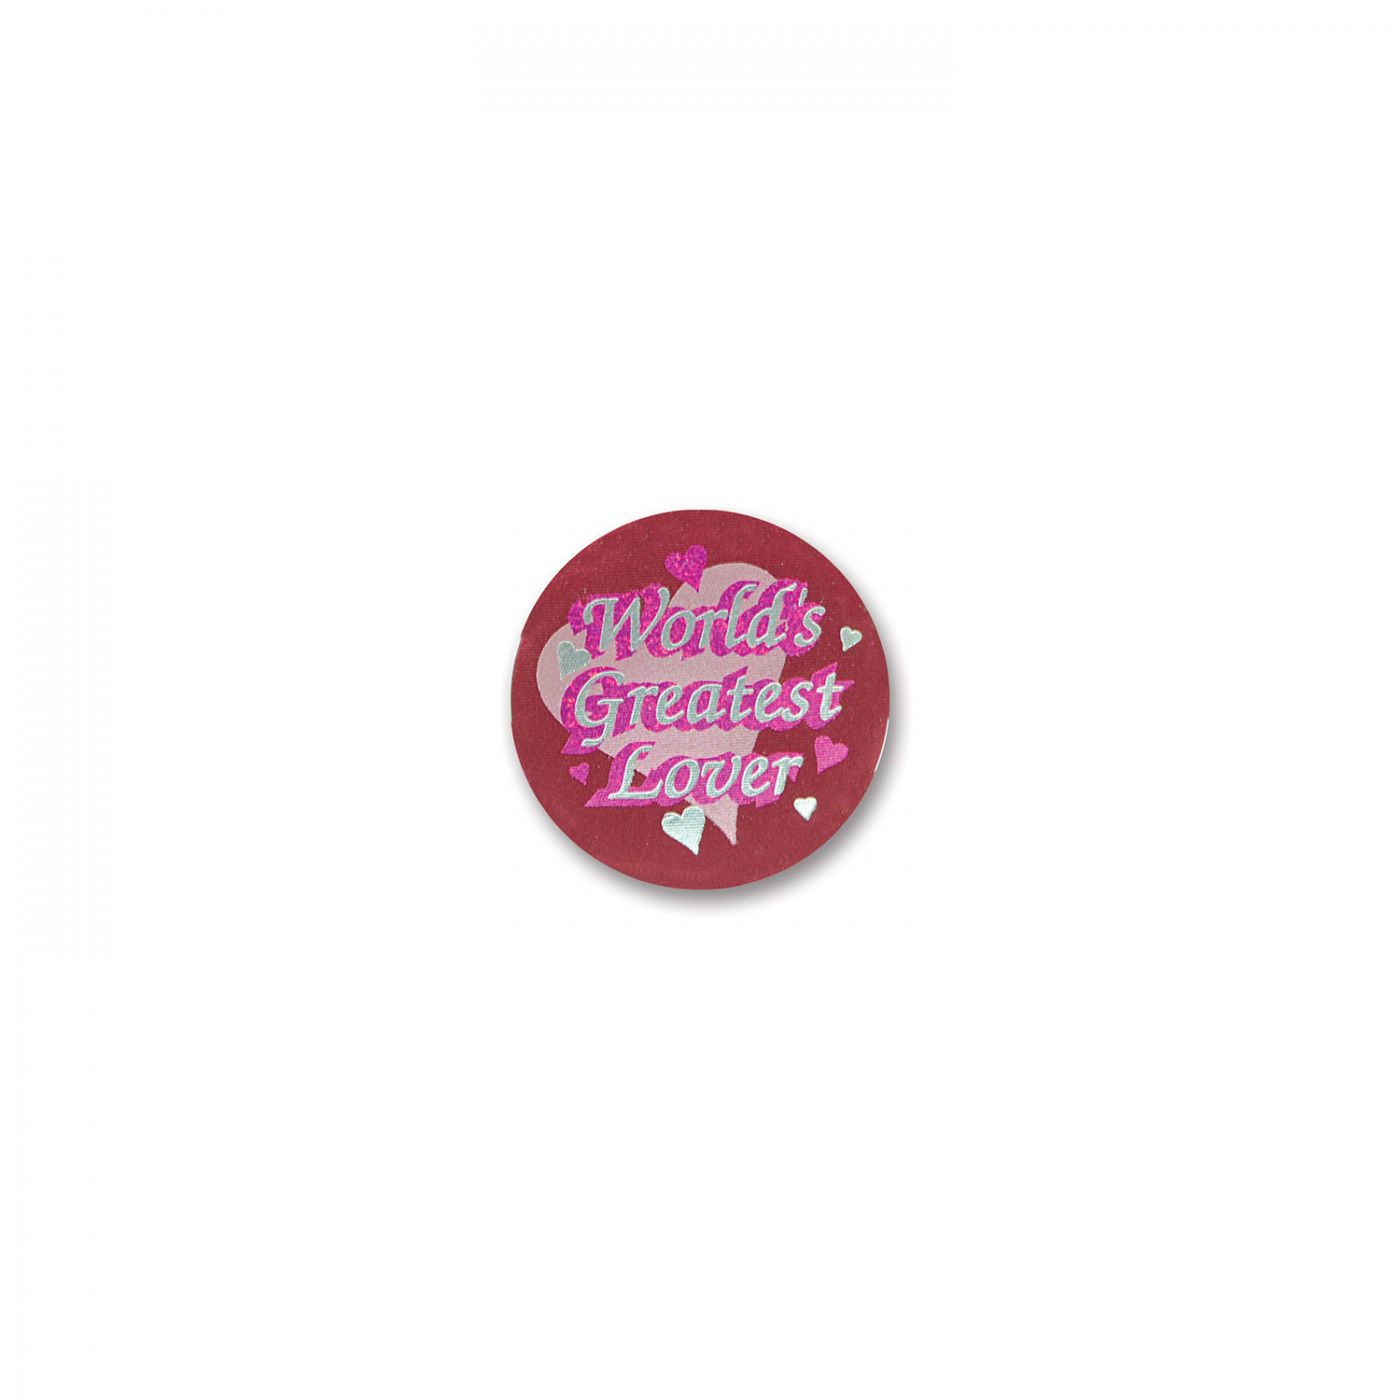 World's Greatest Lover Satin Button (6) image